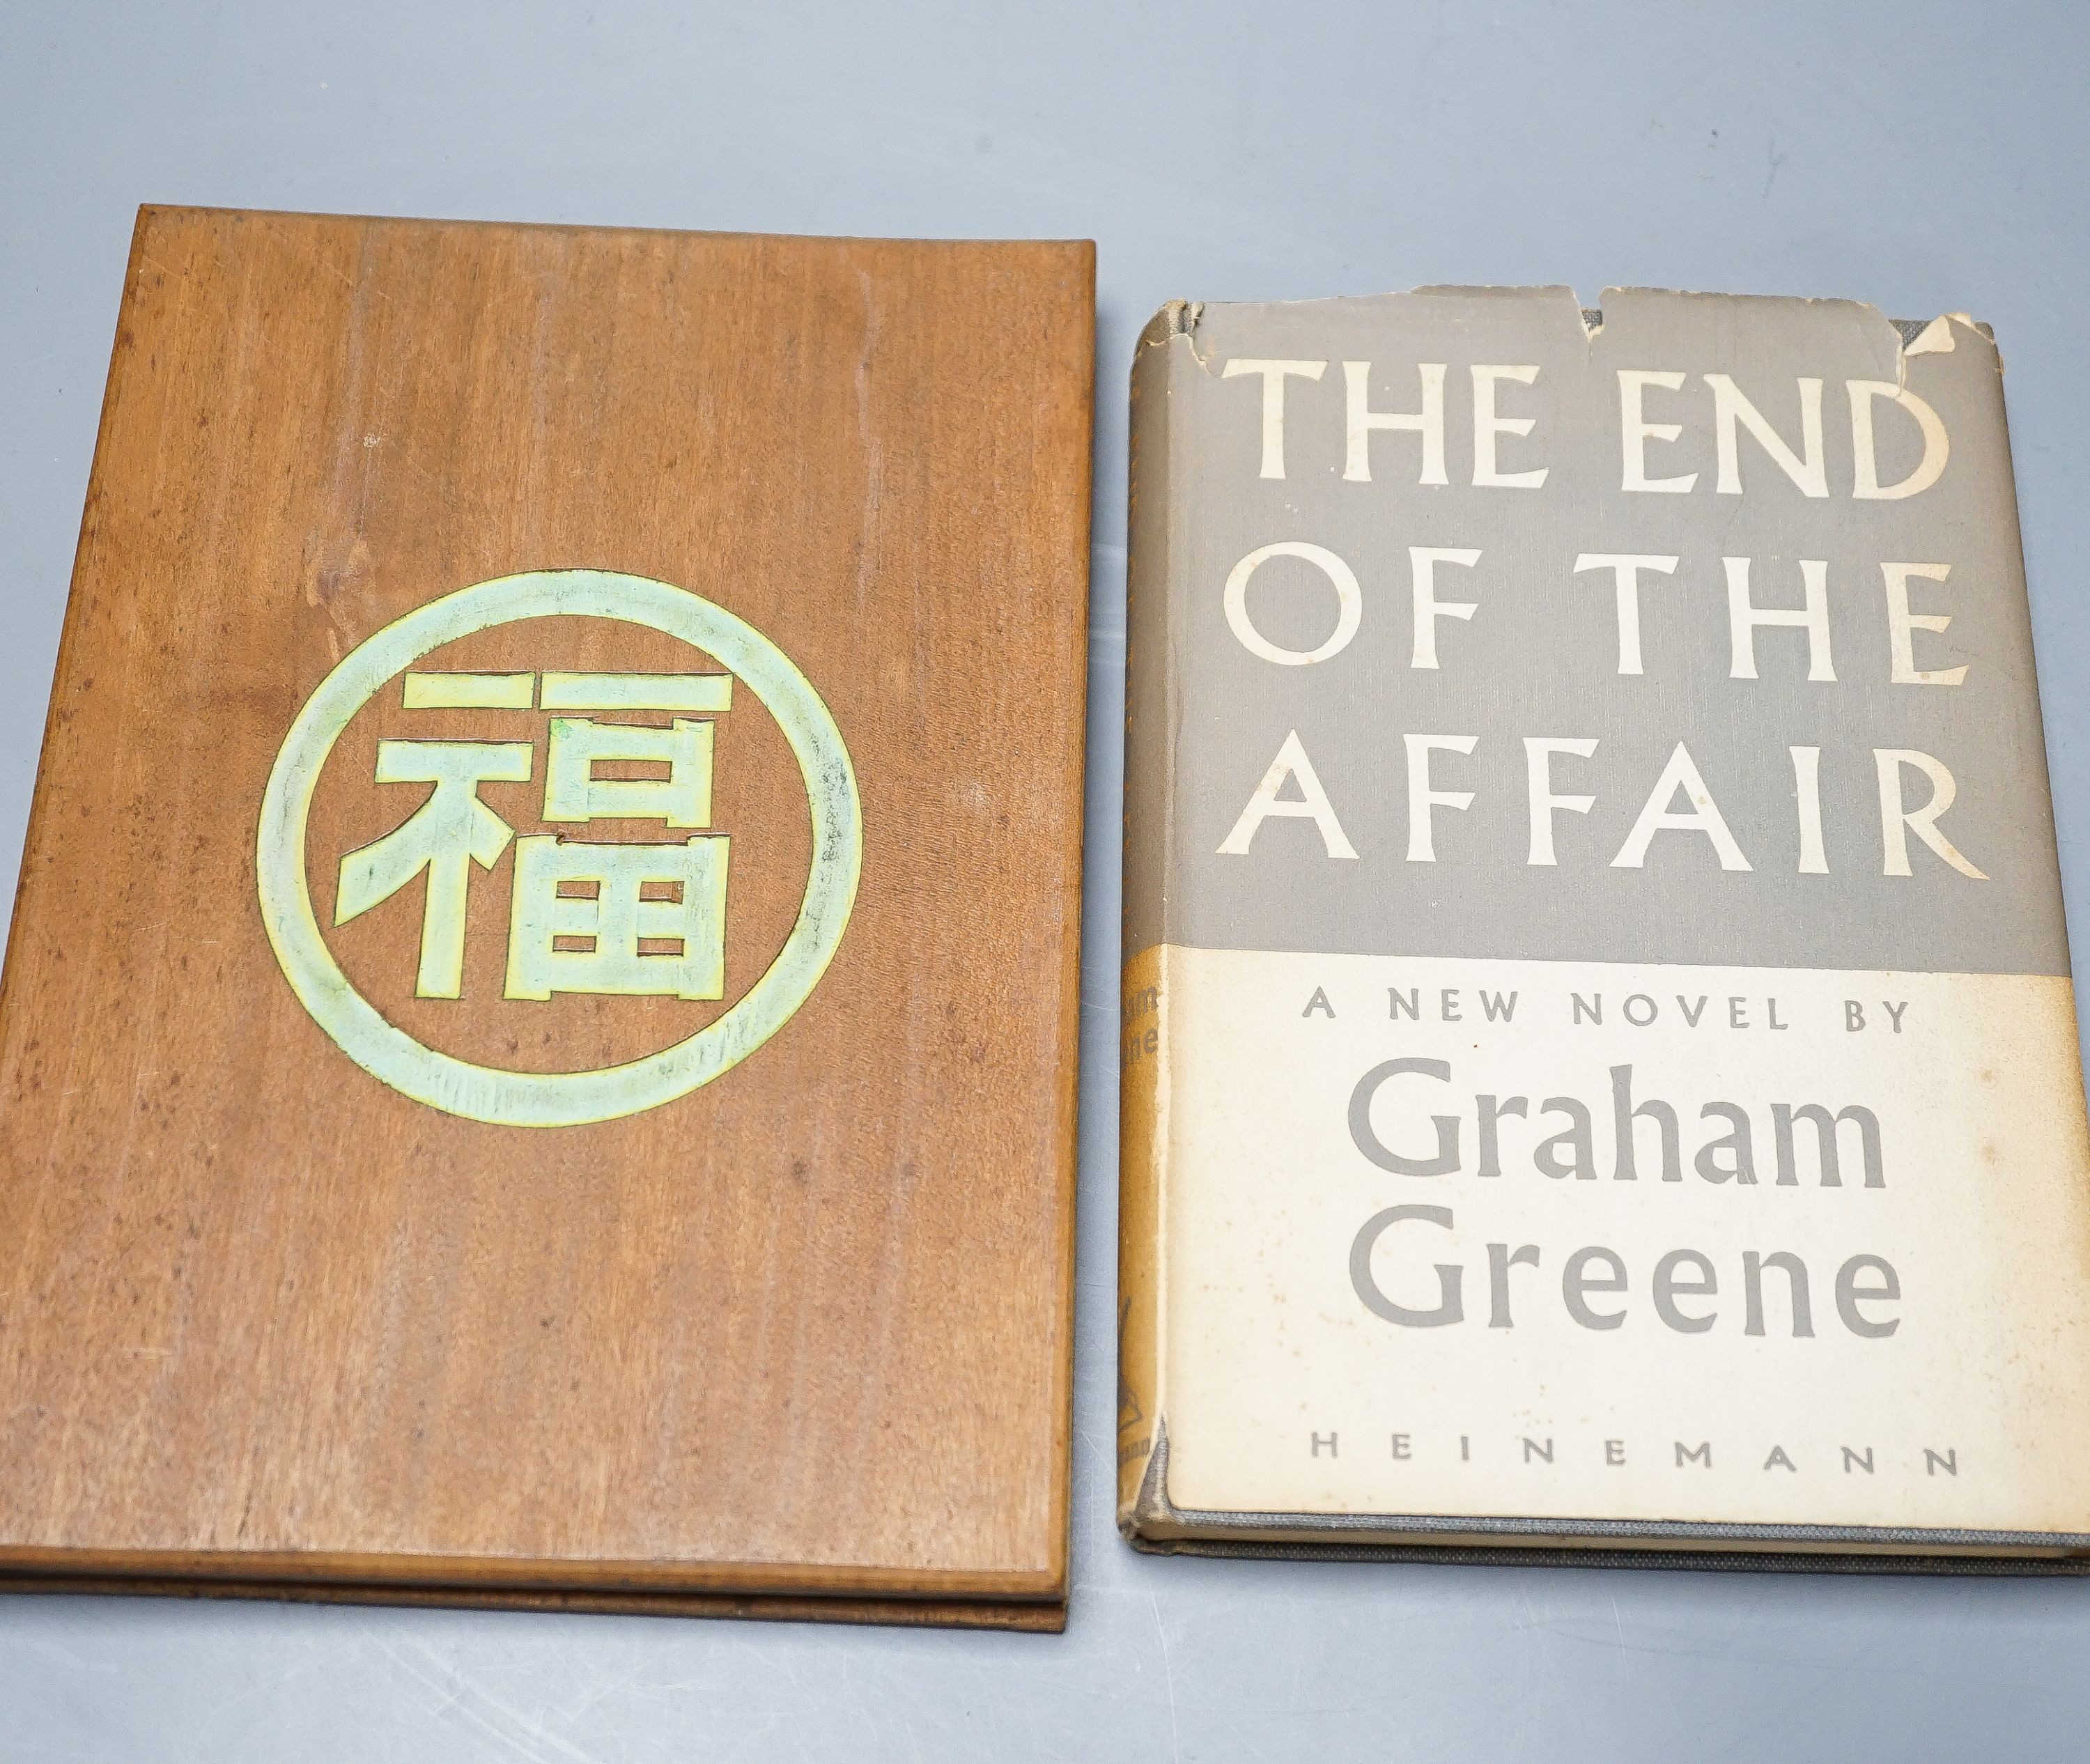 Chinese book with colour plates and The End Of The Affair by Graham Greene.